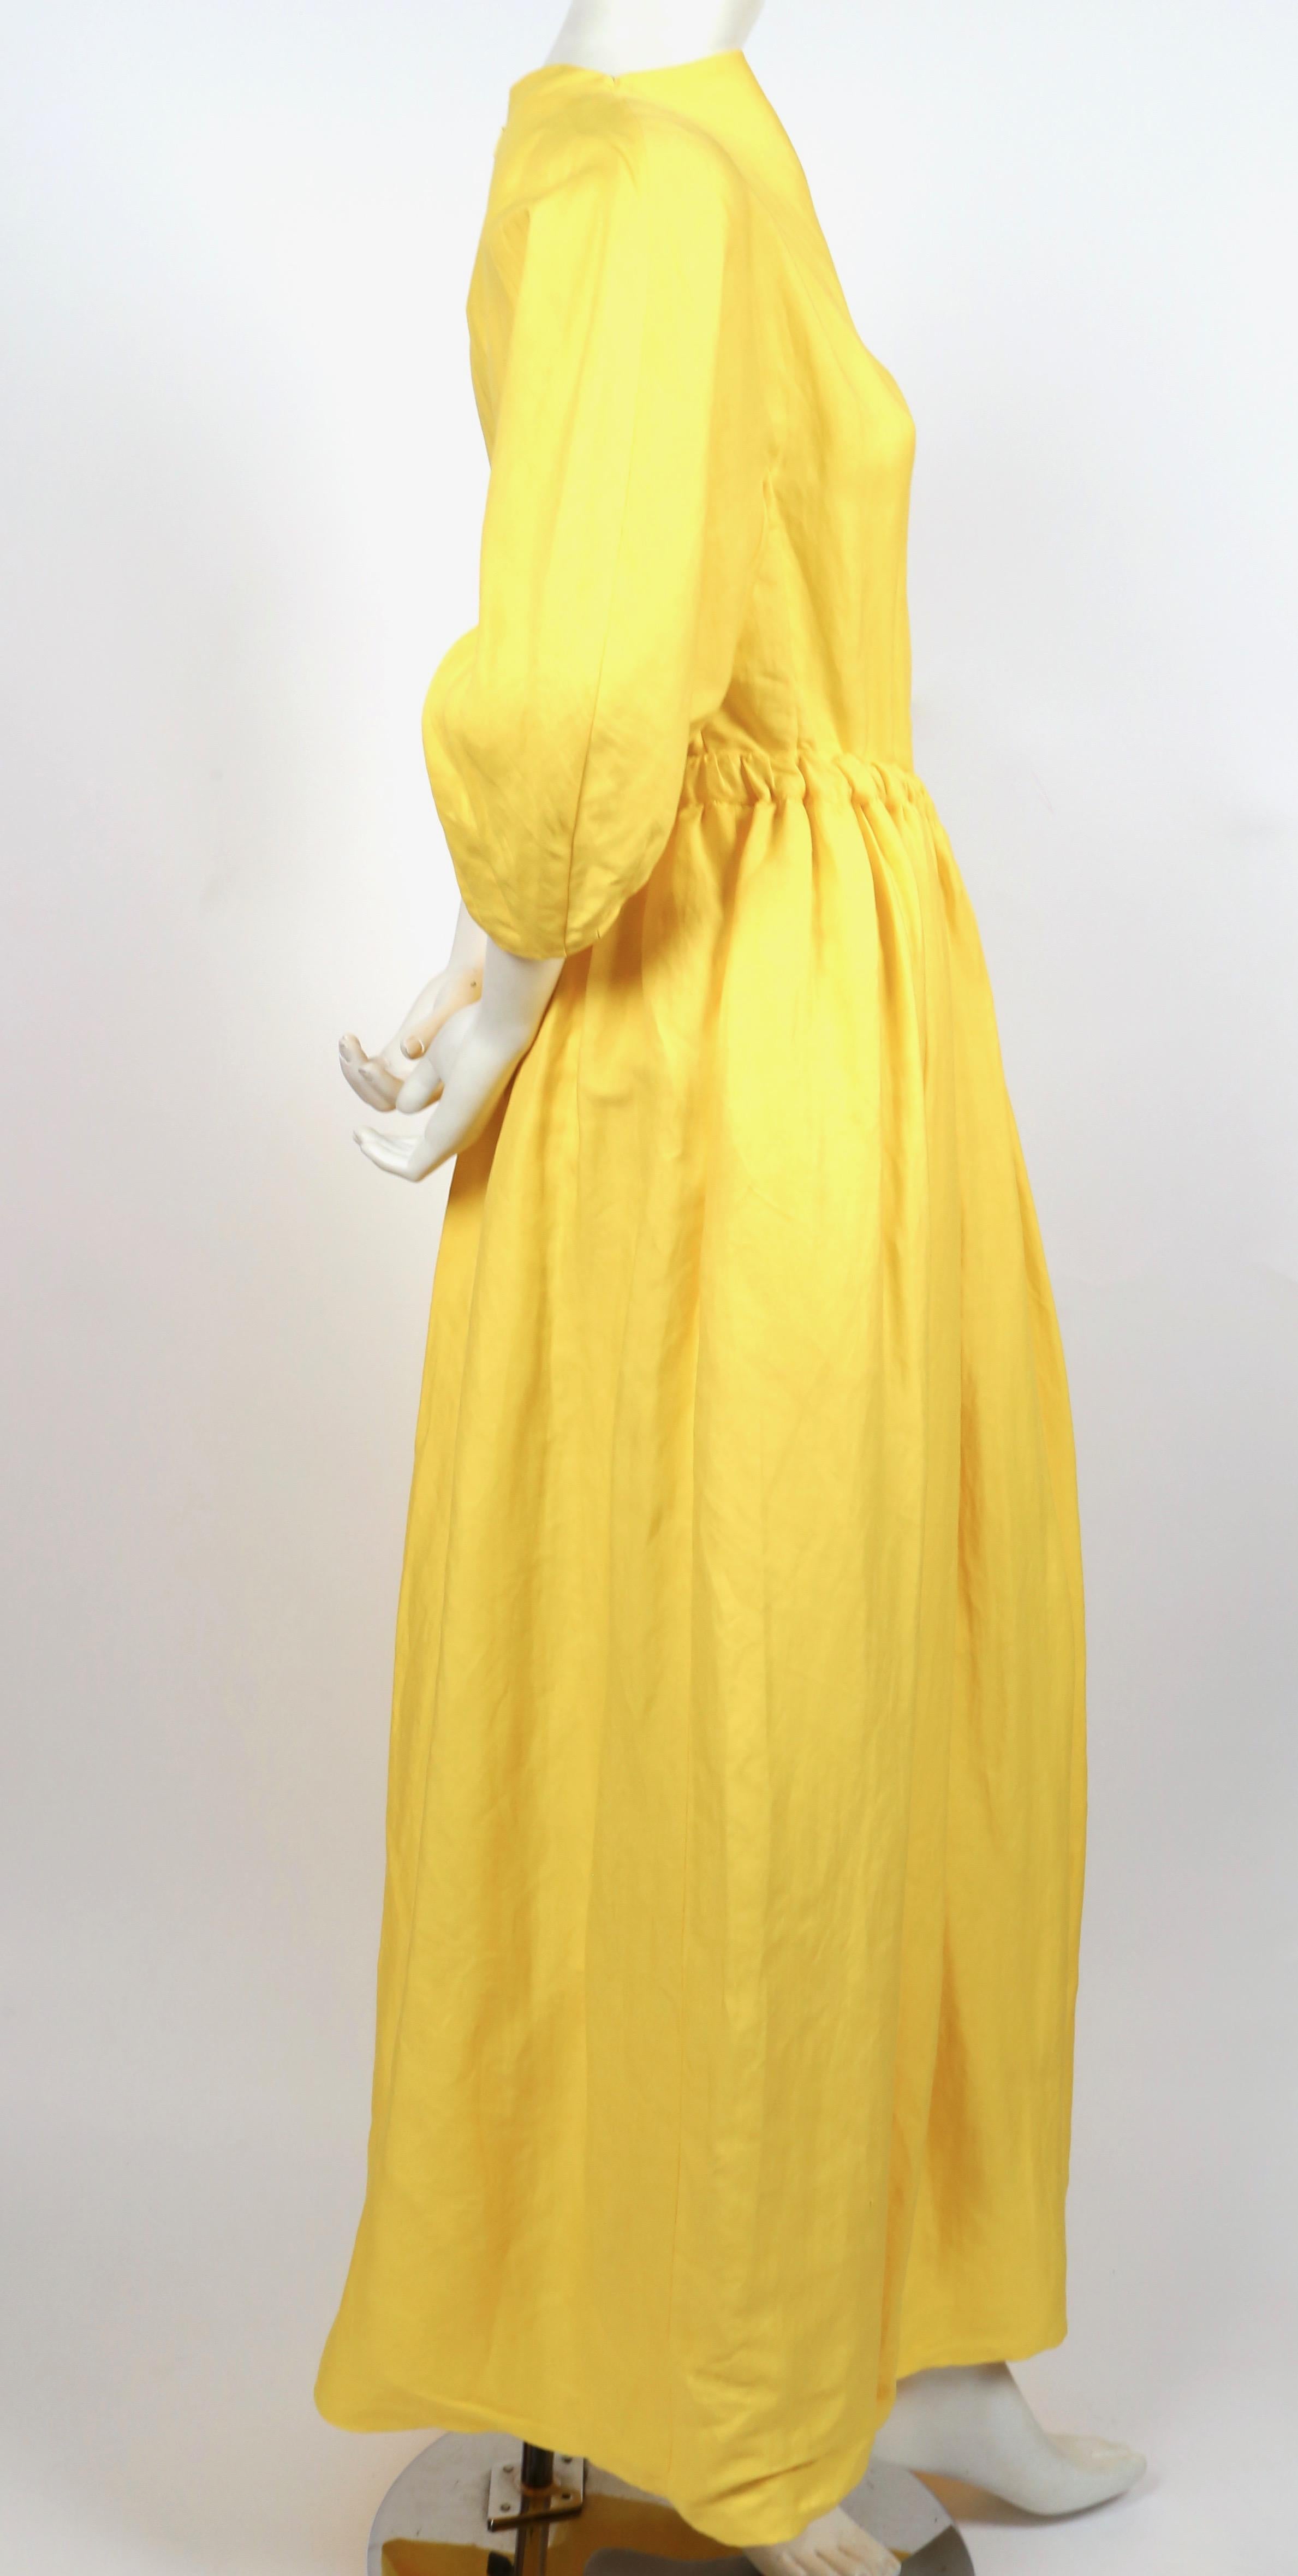 Vivid, yellow linen maxi dress with side cutout detail designed by Phoebe Philo for Celine. Dress is labeled a French size 36. Measurements are very difficult to take for this piece however it was not clipped on the size 2 mannequin. Approximate